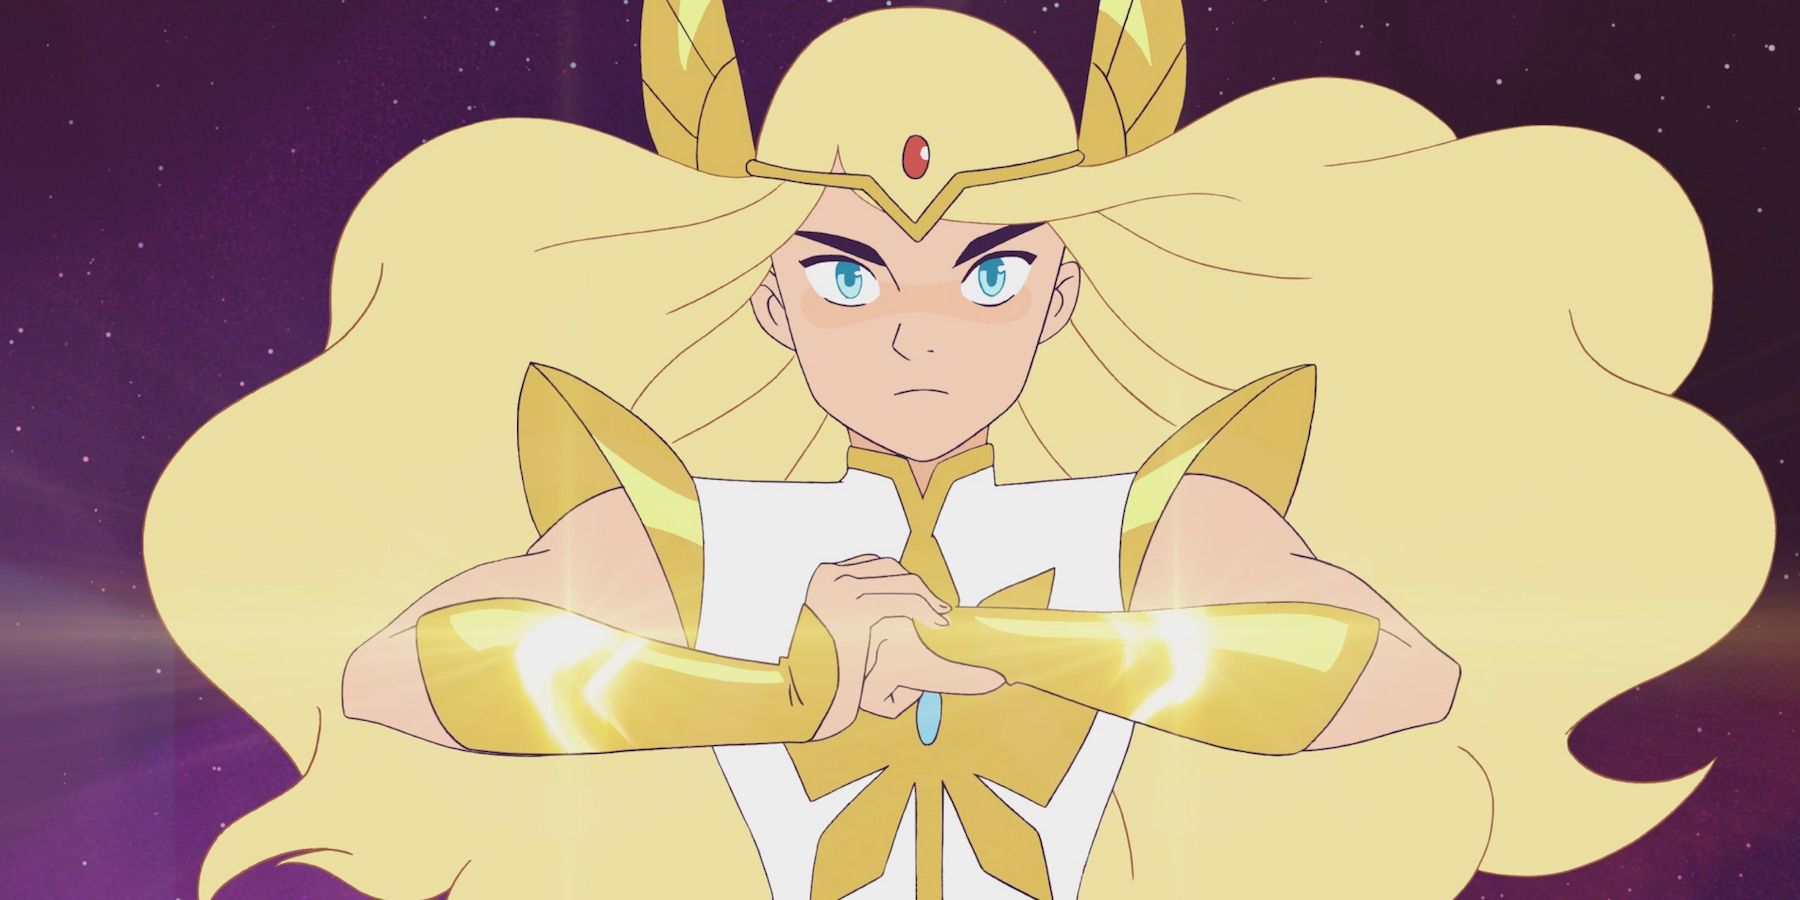 She-Ra clinches her fist from the remake TV show